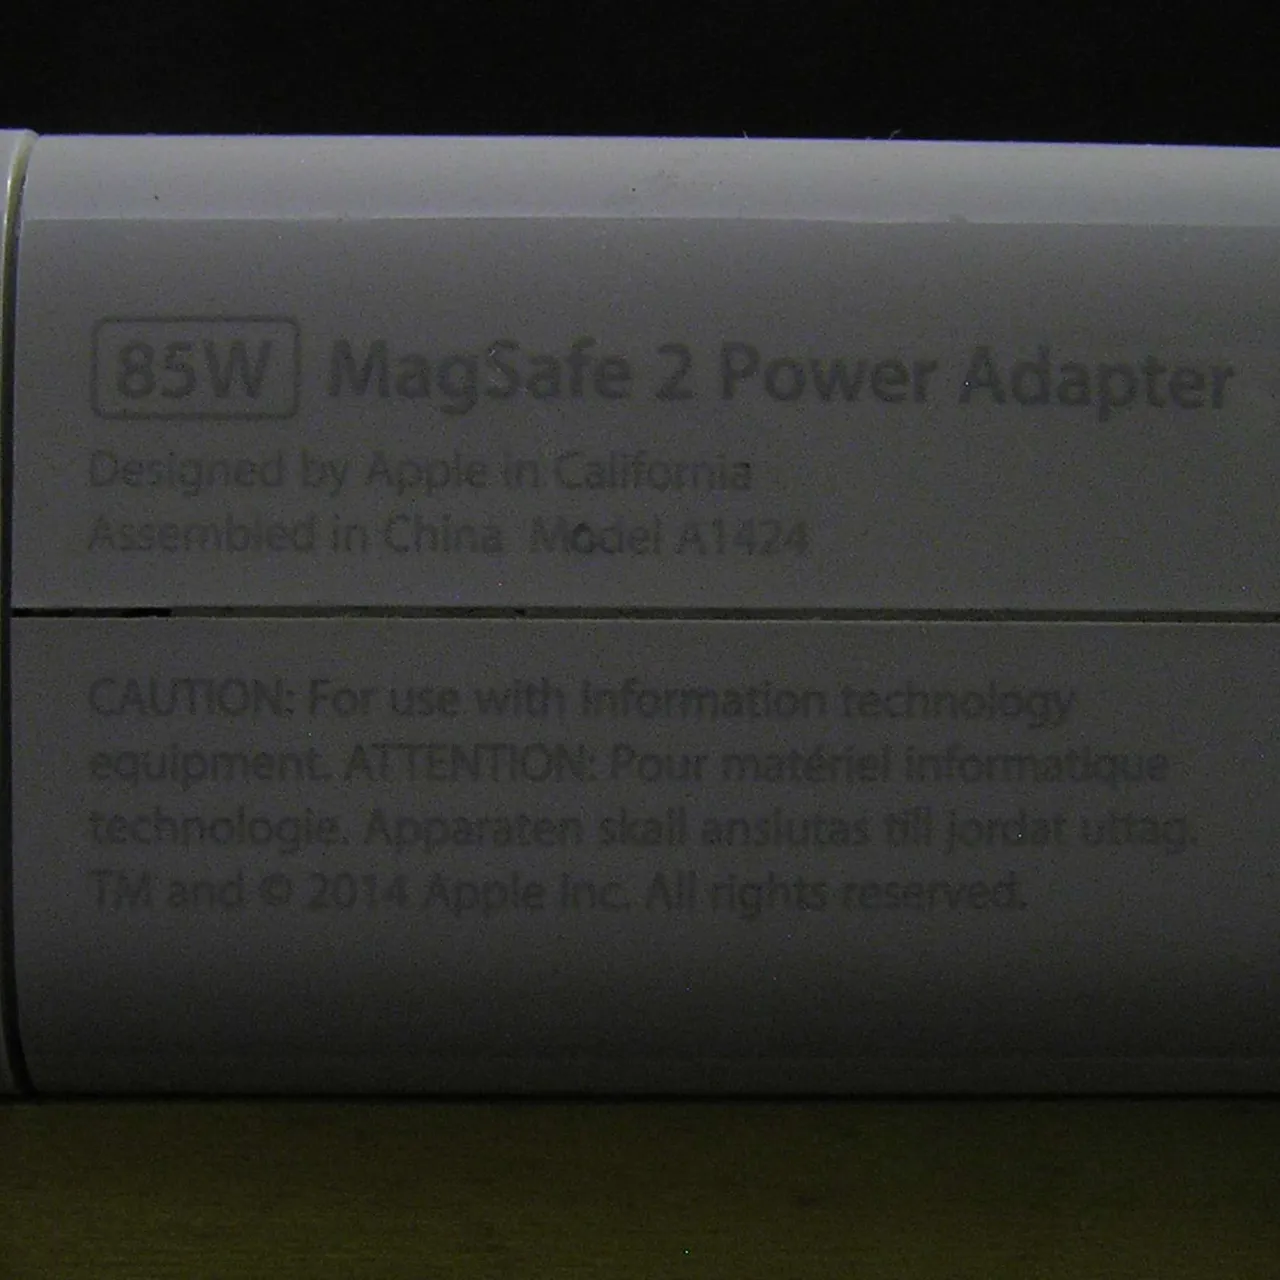 Apple MagSafe 2 Power Adapters photo 3